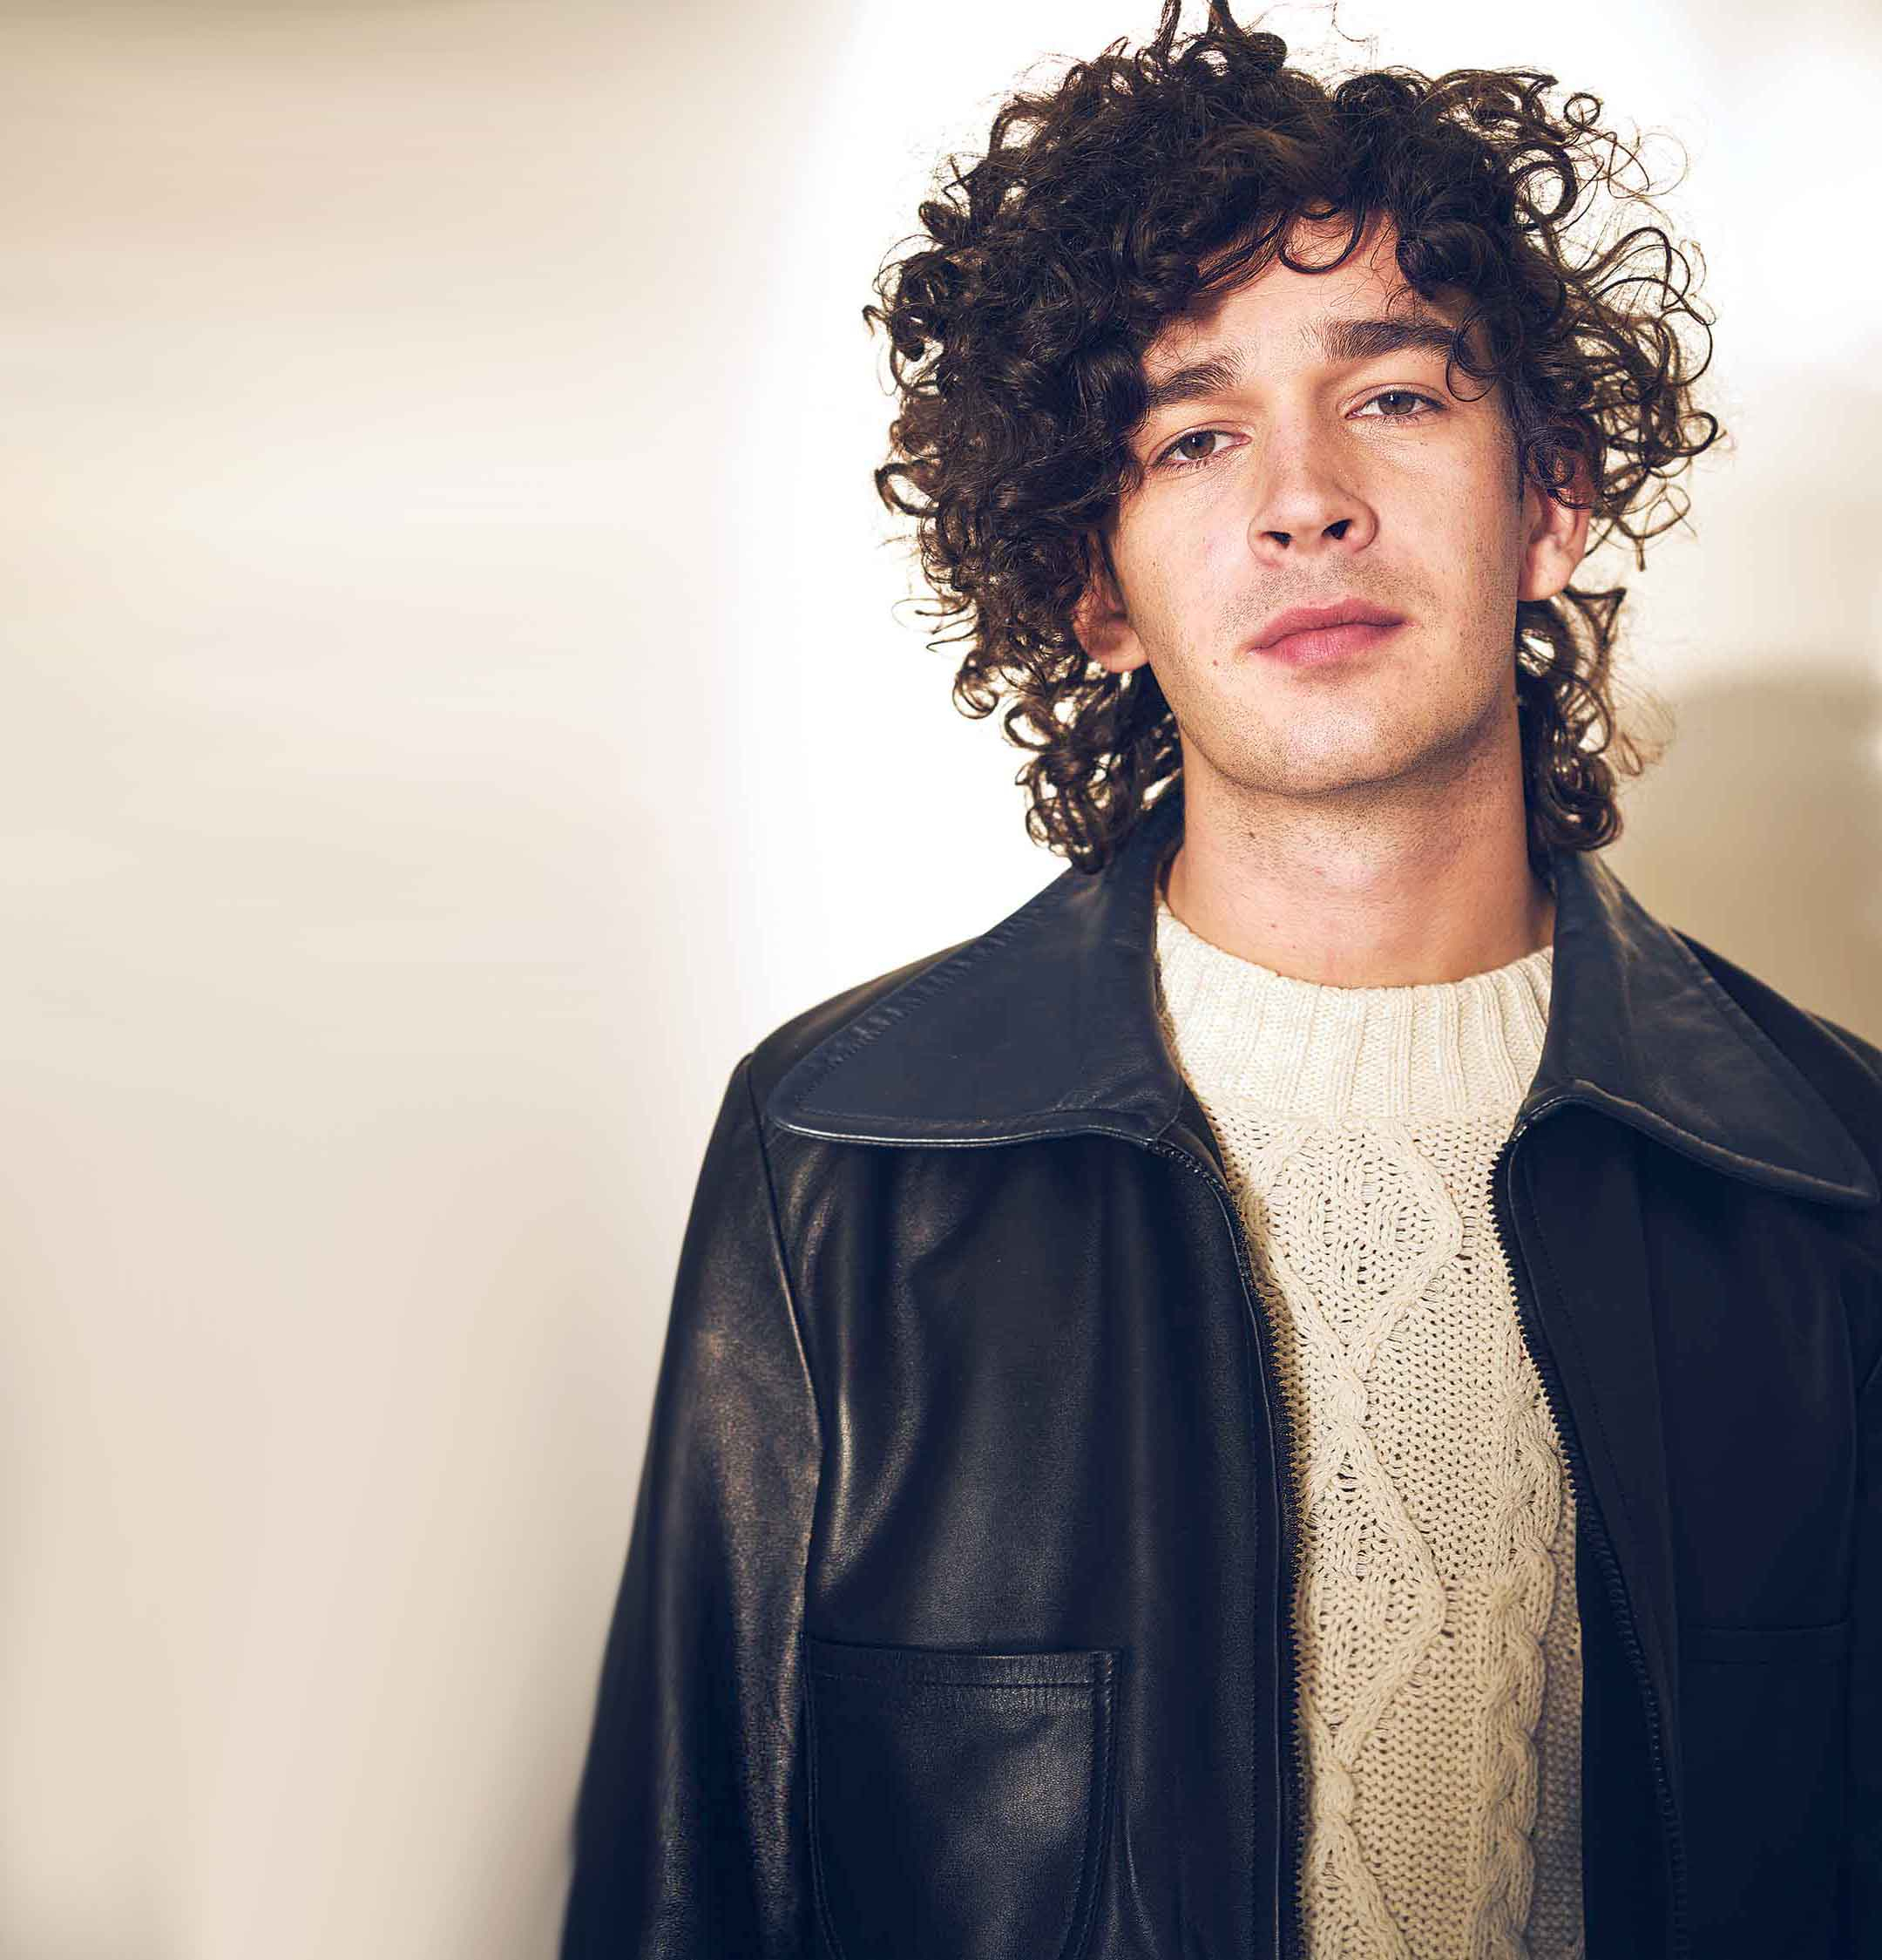 Matty Healy: The Enigmatic Frontman Redefining Modern Rock With The 1975